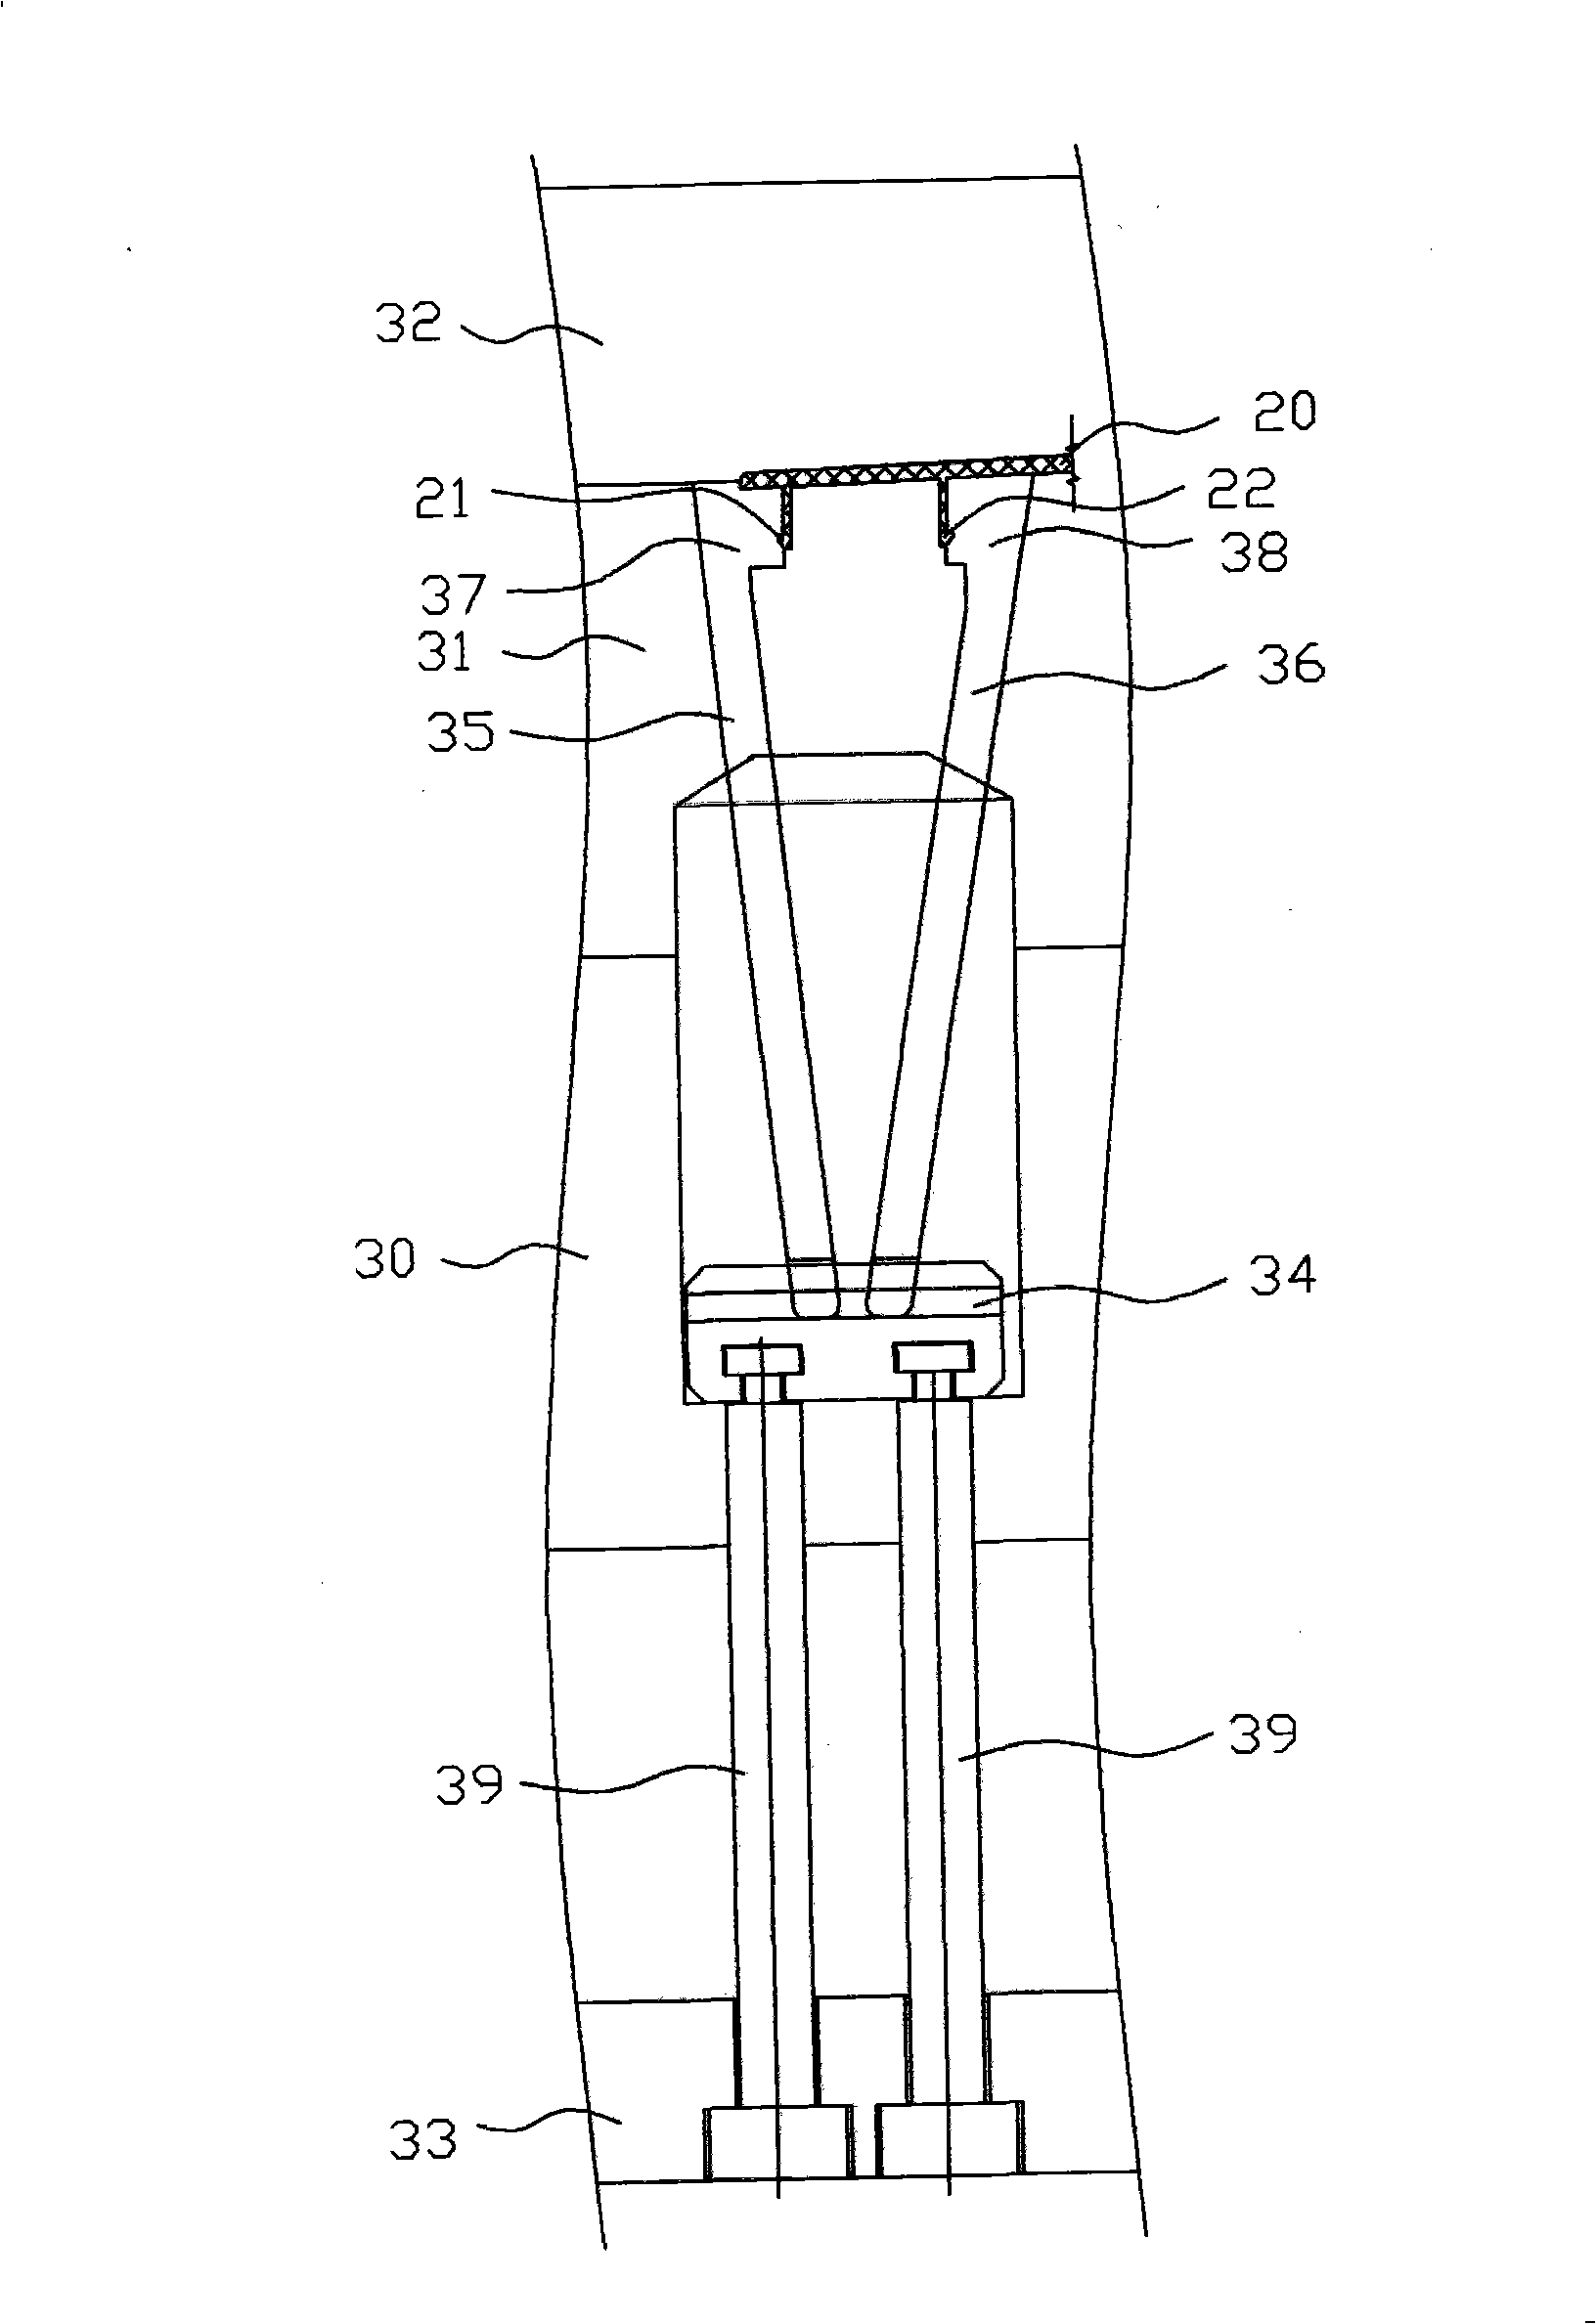 Novel inclined pin ejecting structure